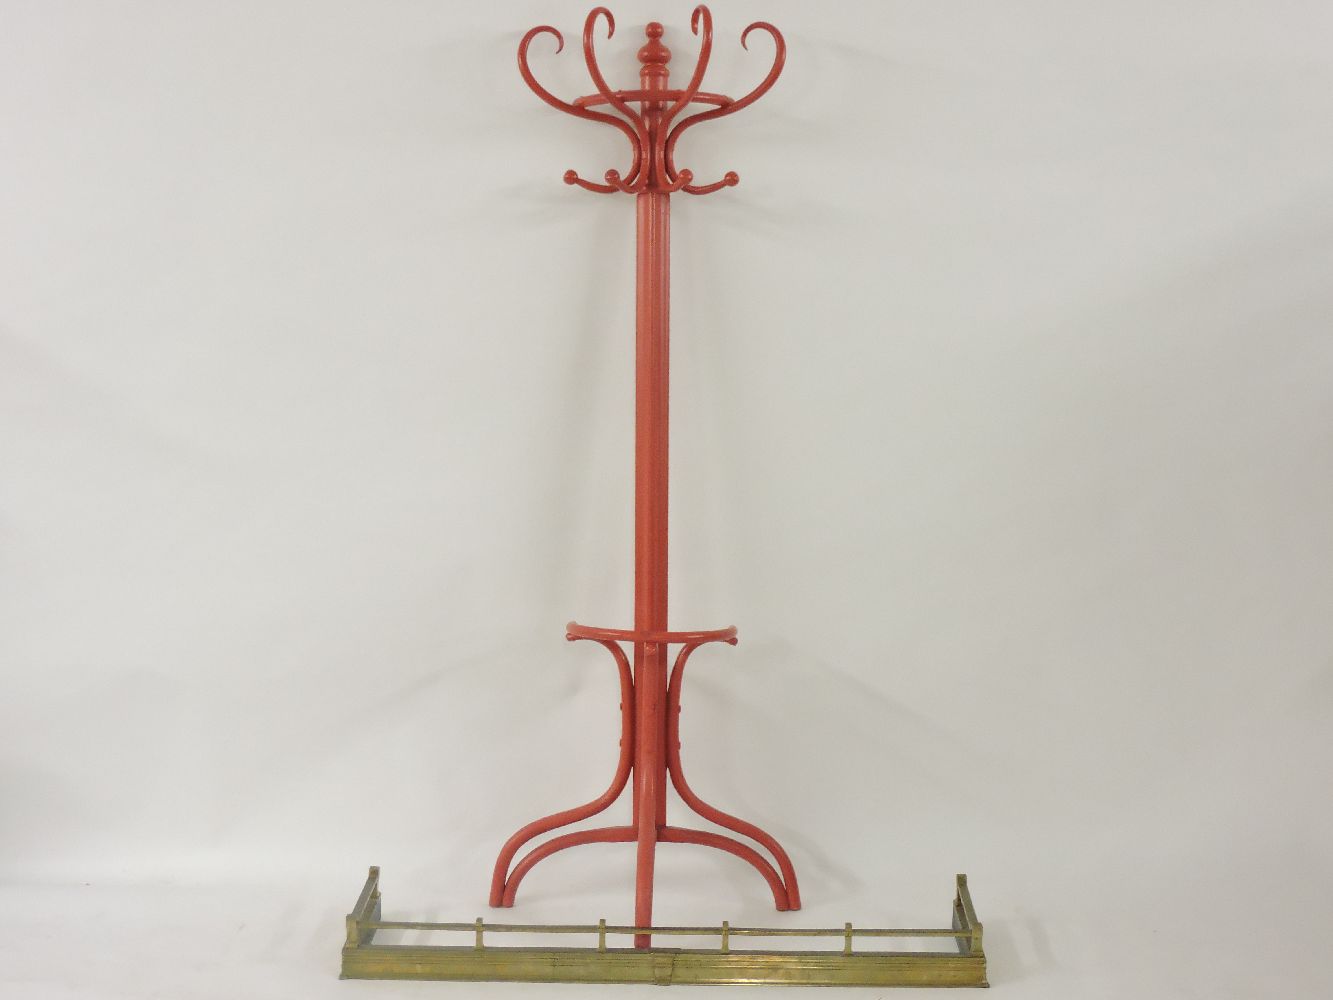 A painted bentwood hat stand/coat rack, and a fender